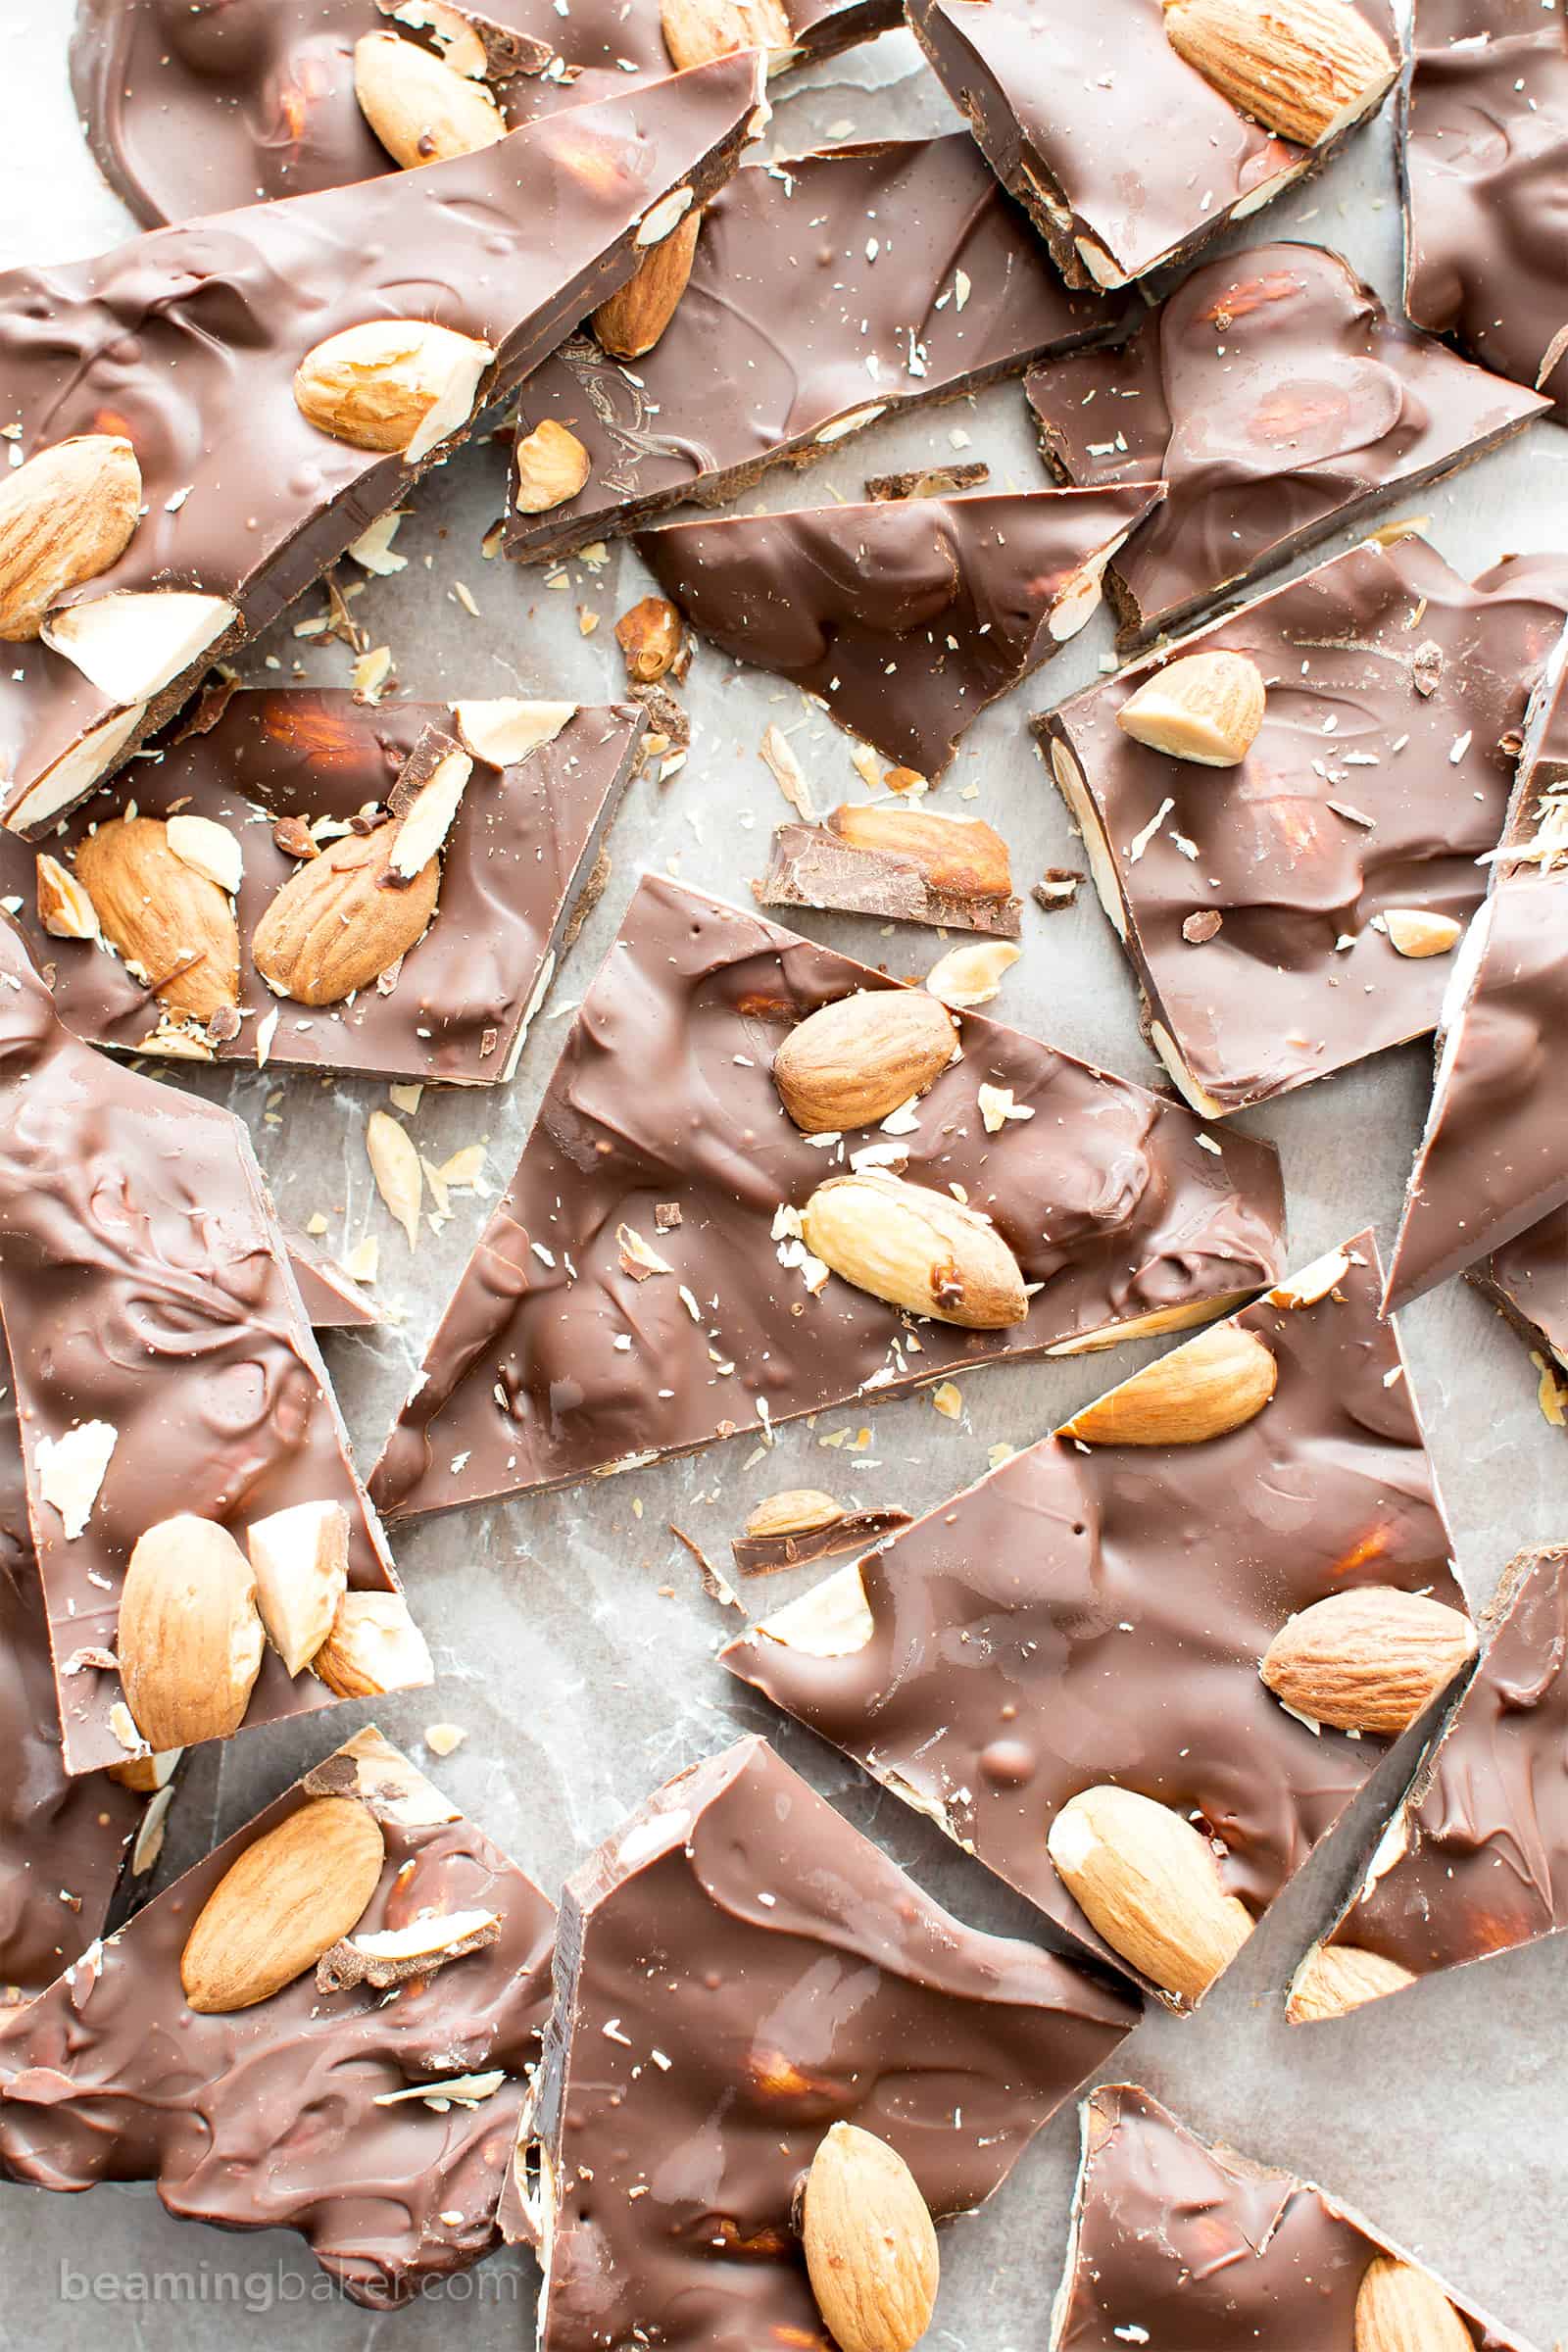 3 Ingredient Chocolate Almond Bark Recipe (V, GF): a fun recipe for thick pieces of indulgent chocolate bark perfectly packed with almonds. #Vegan #Paleo #GlutenFree #DairyFree #Dessert #Candy | Recipe on BeamingBaker.com